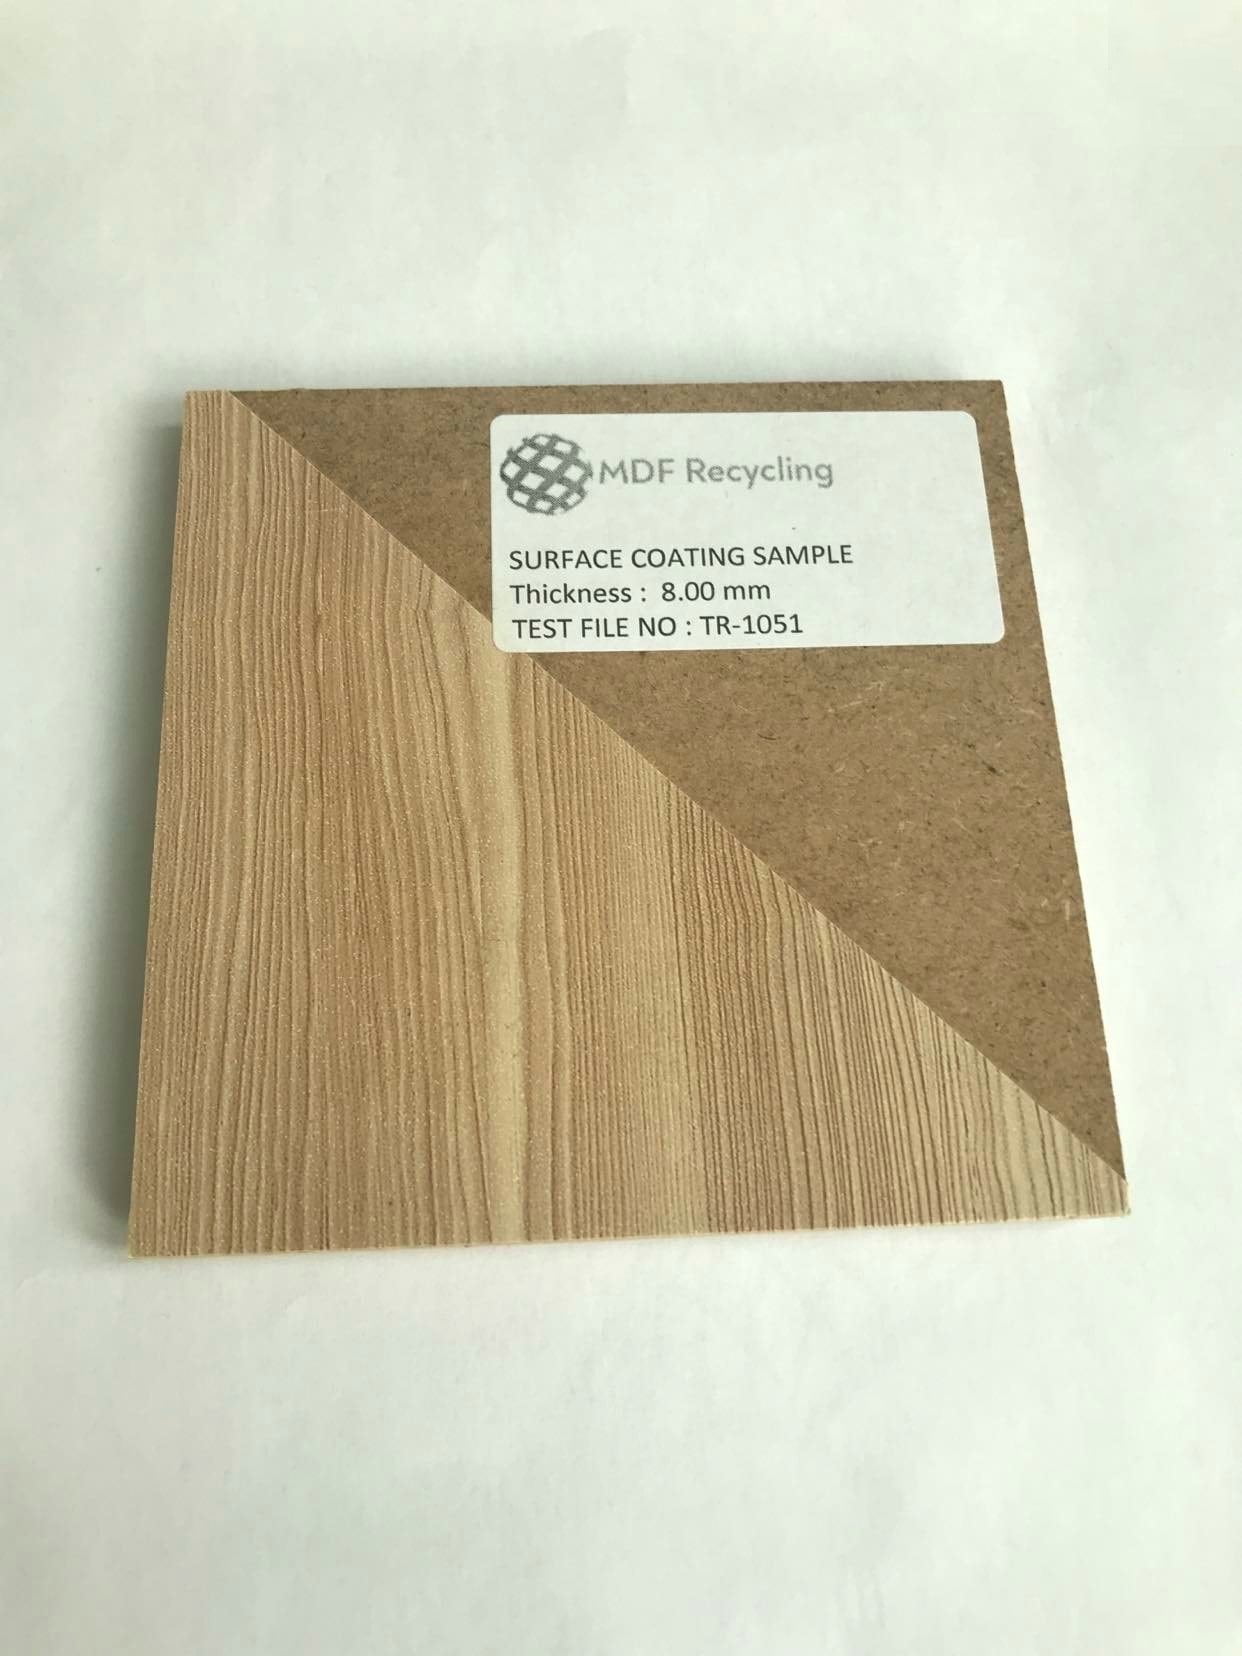 MDF Recycling surface coating